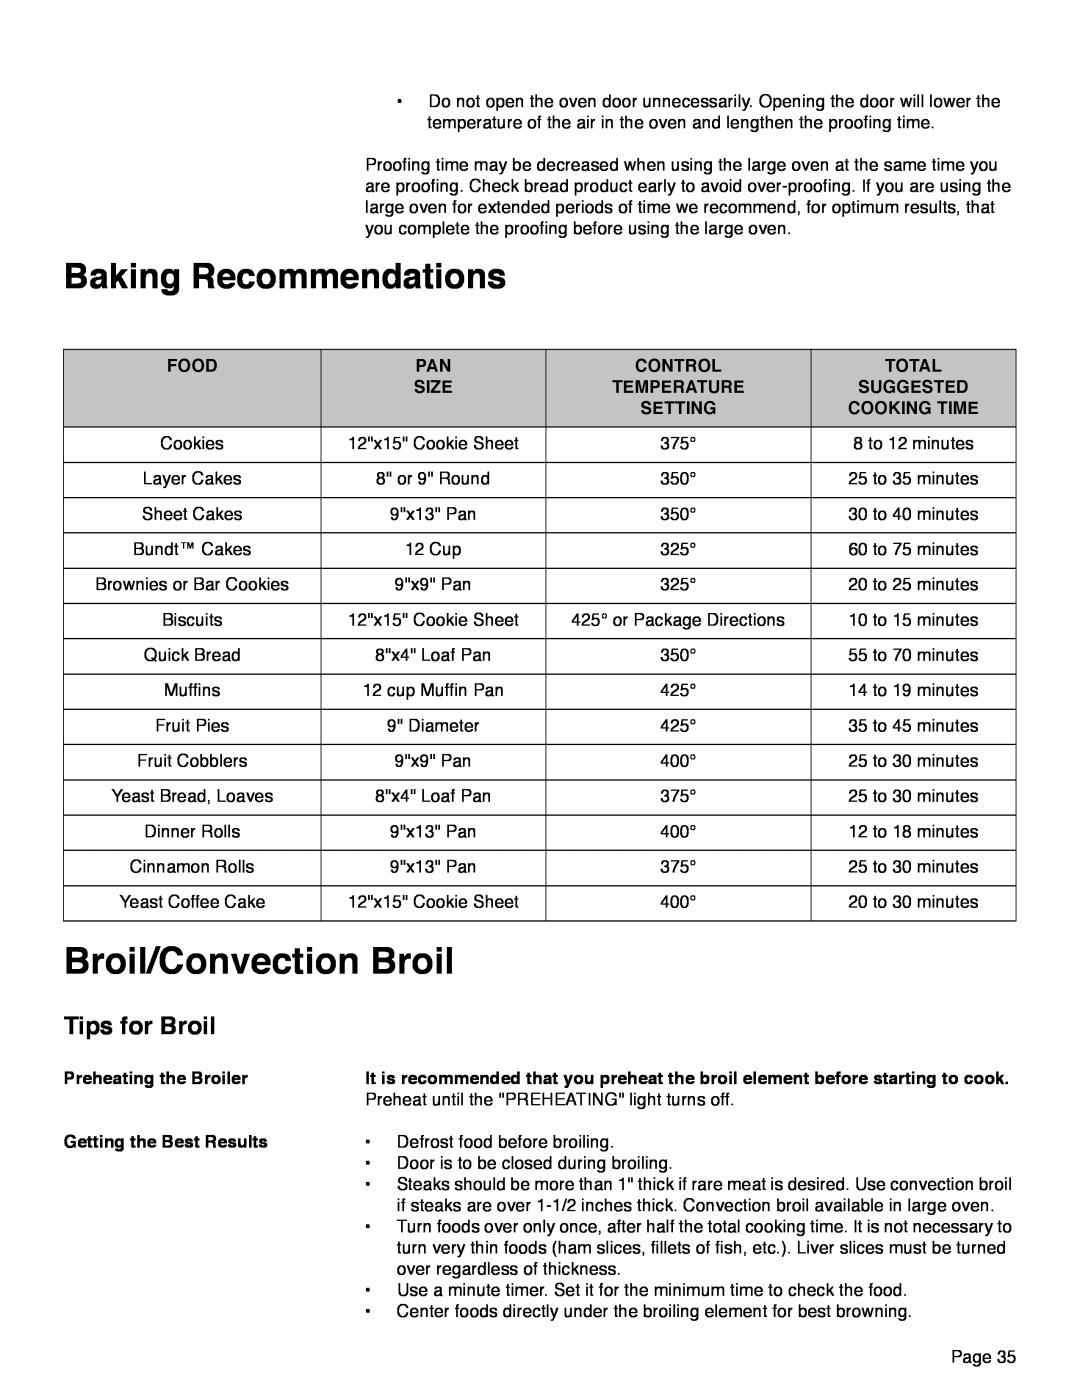 Thermador PRD30, PRD48, PRD36 manual Broil/Convection Broil, Baking Recommendations, Tips for Broil 